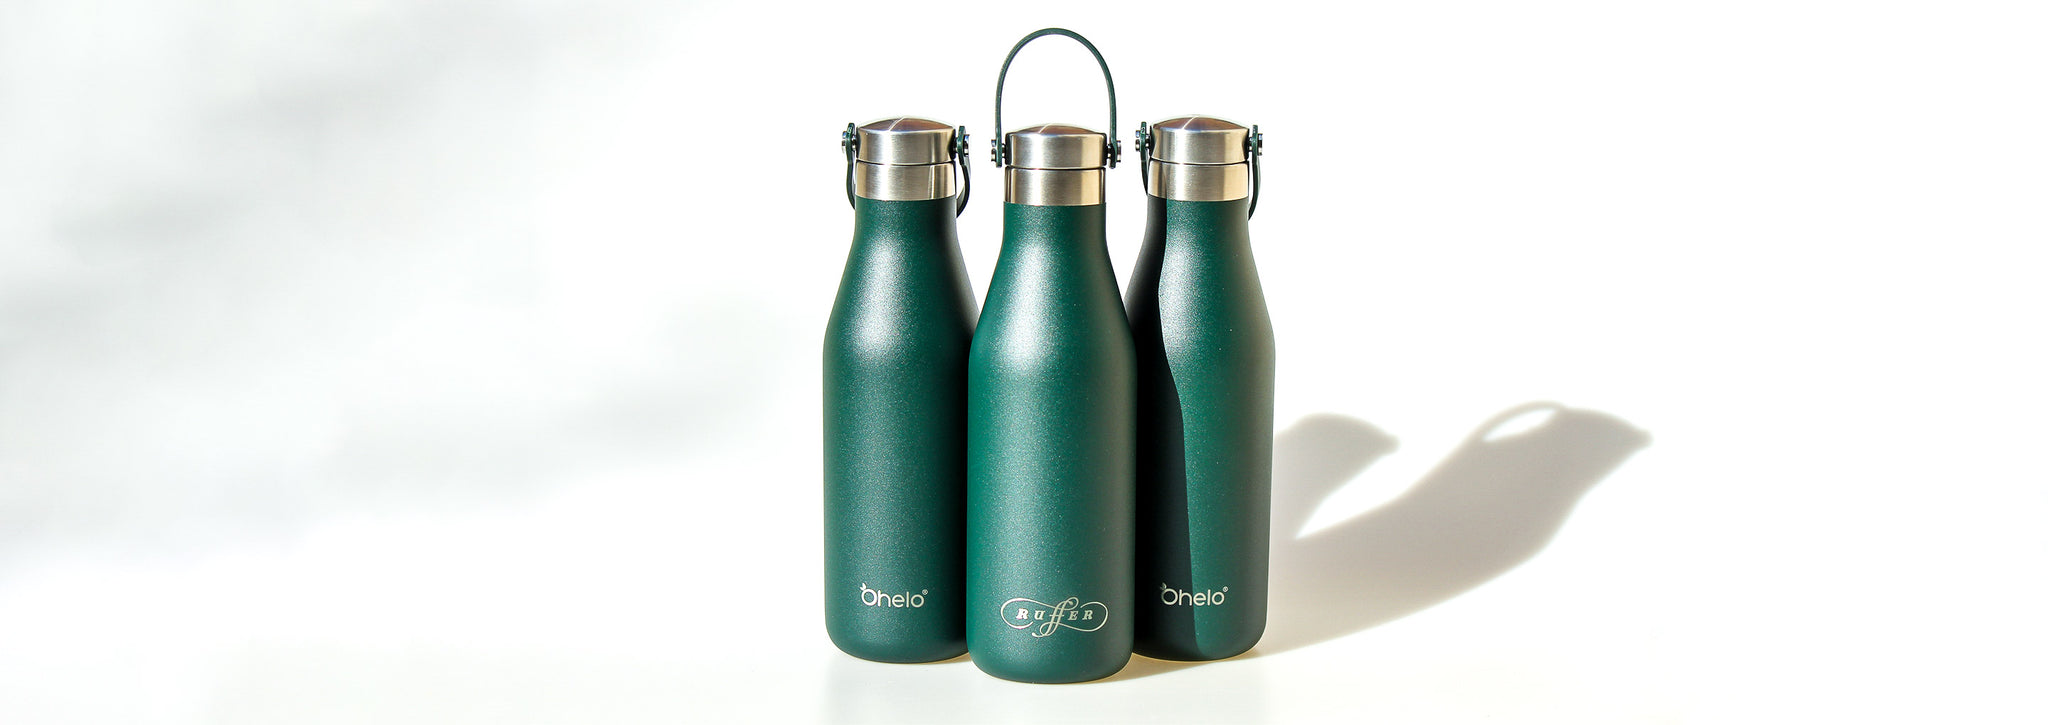 Corporate branded water bottles for Ruffer LLP by Ohelo